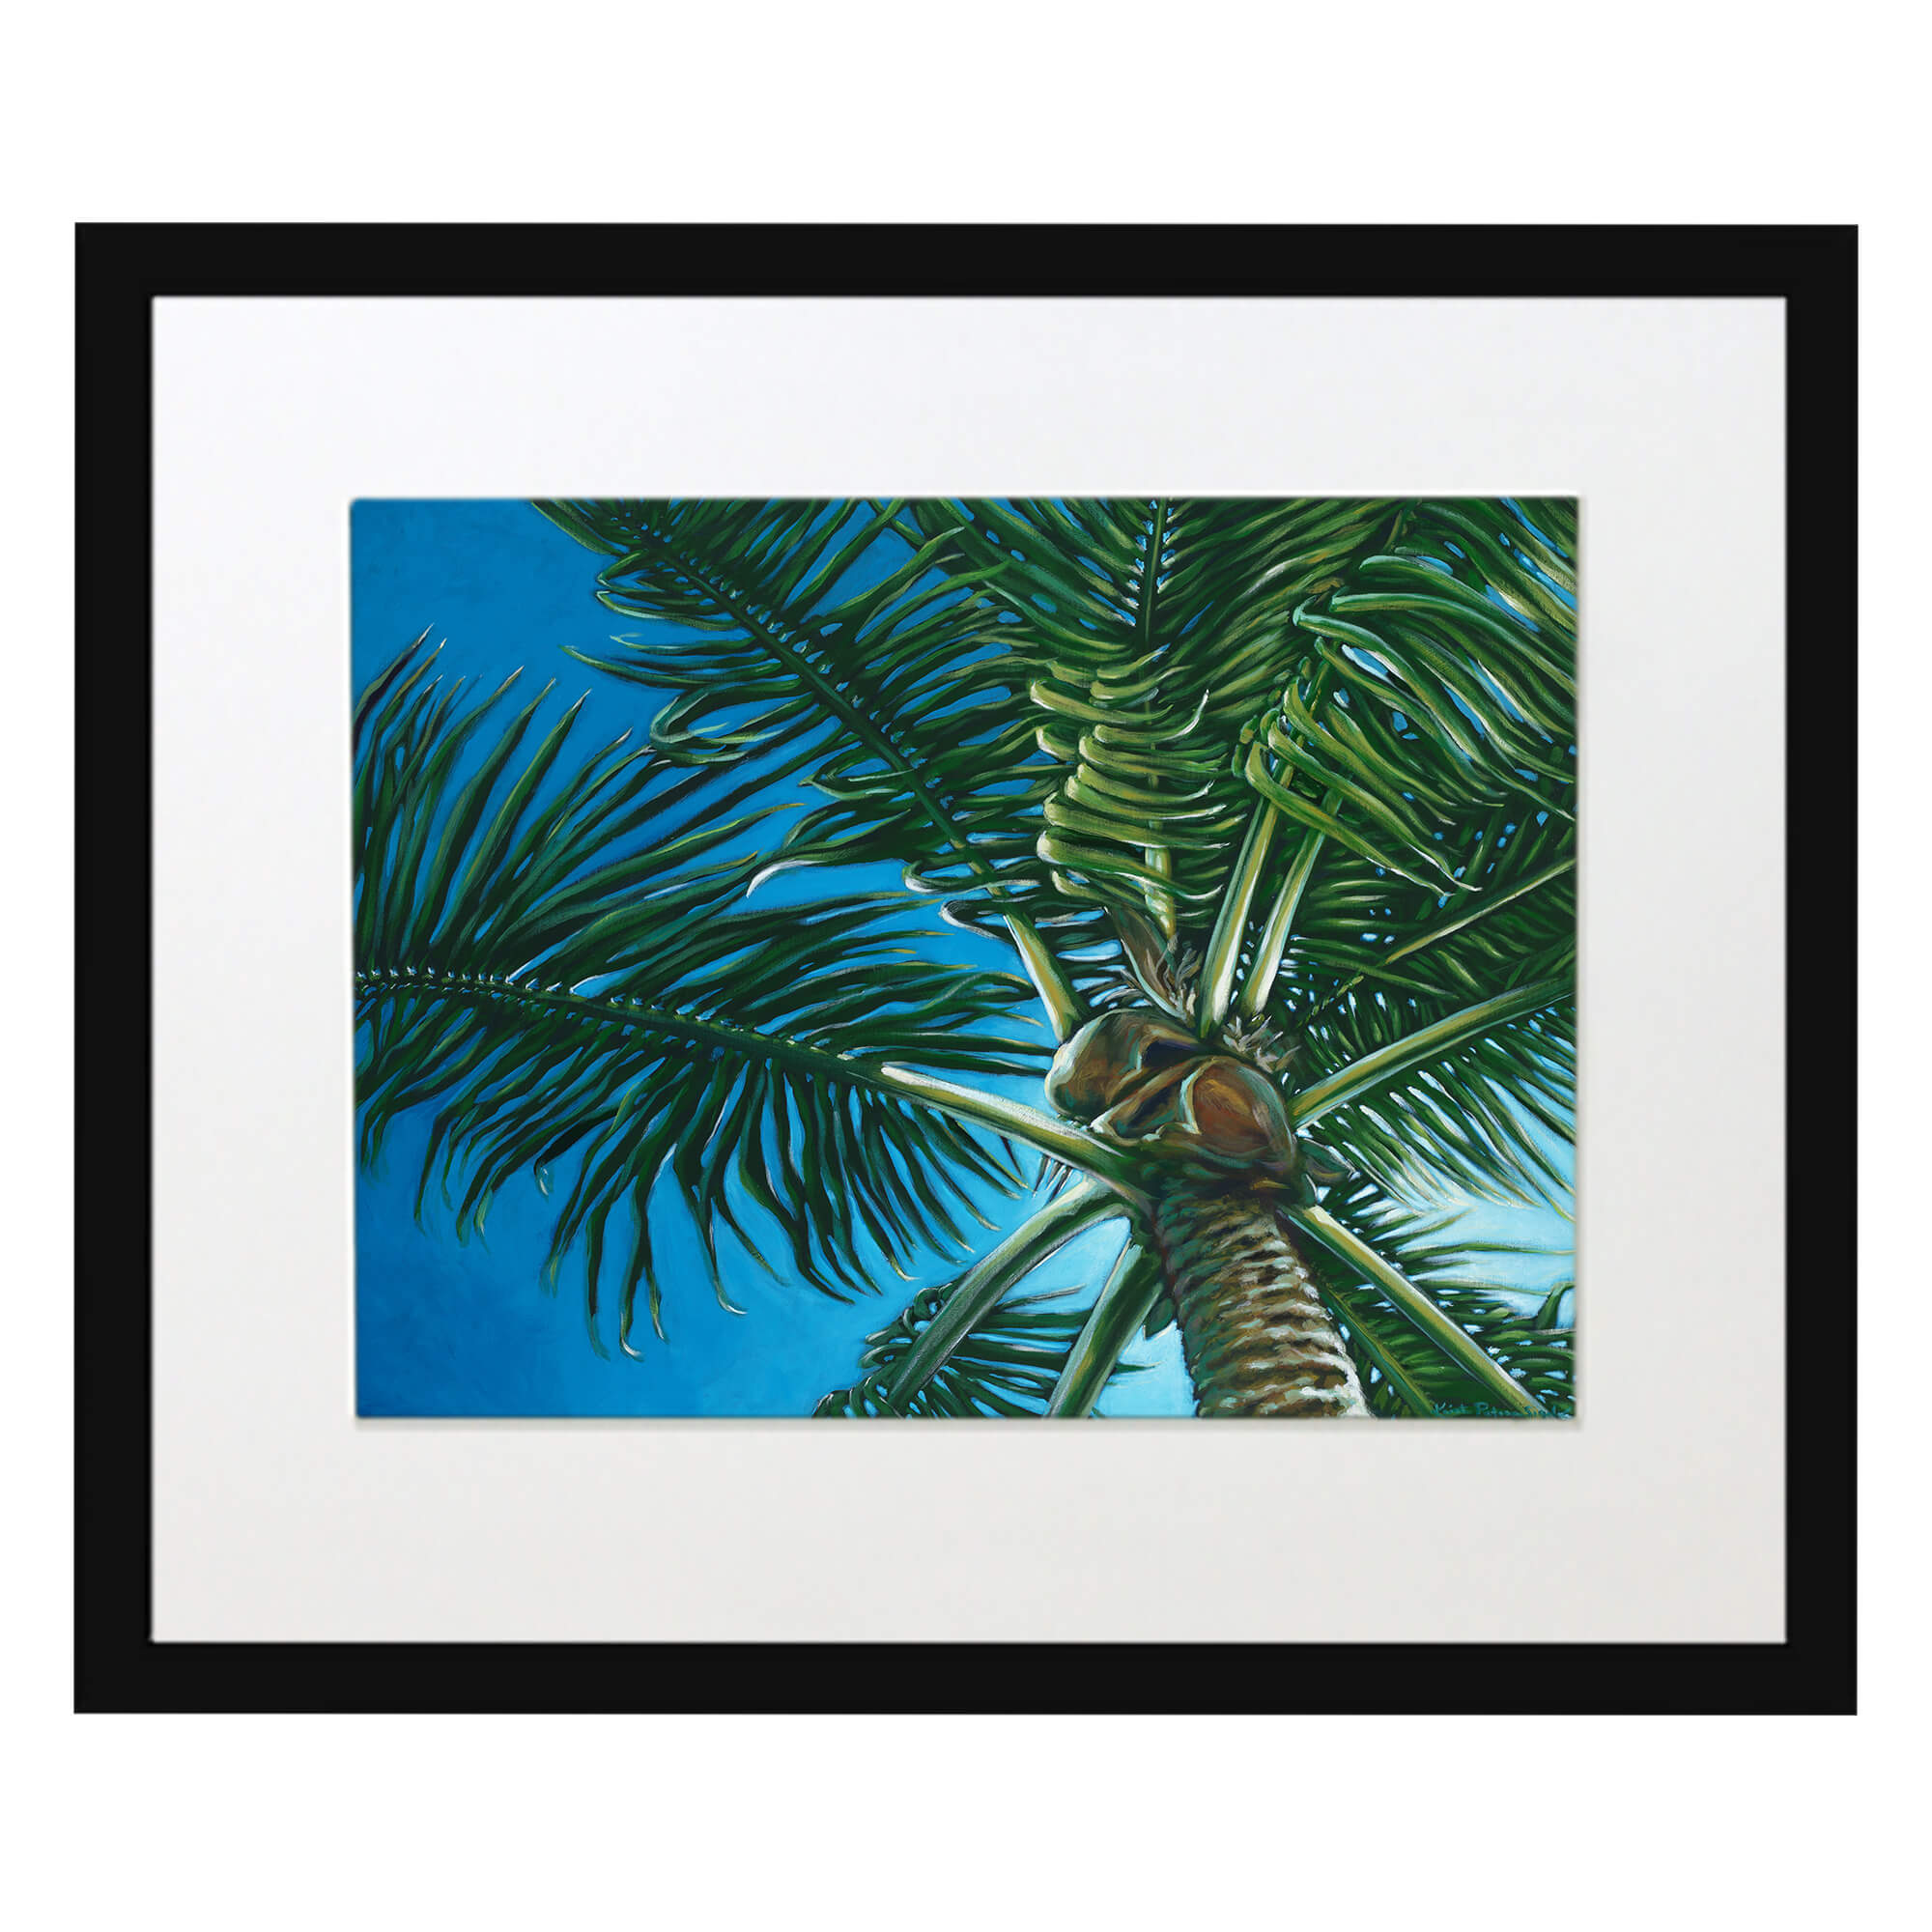 Matted art print with black frame featuring a coconut by hawaii artist Kristi Petosa